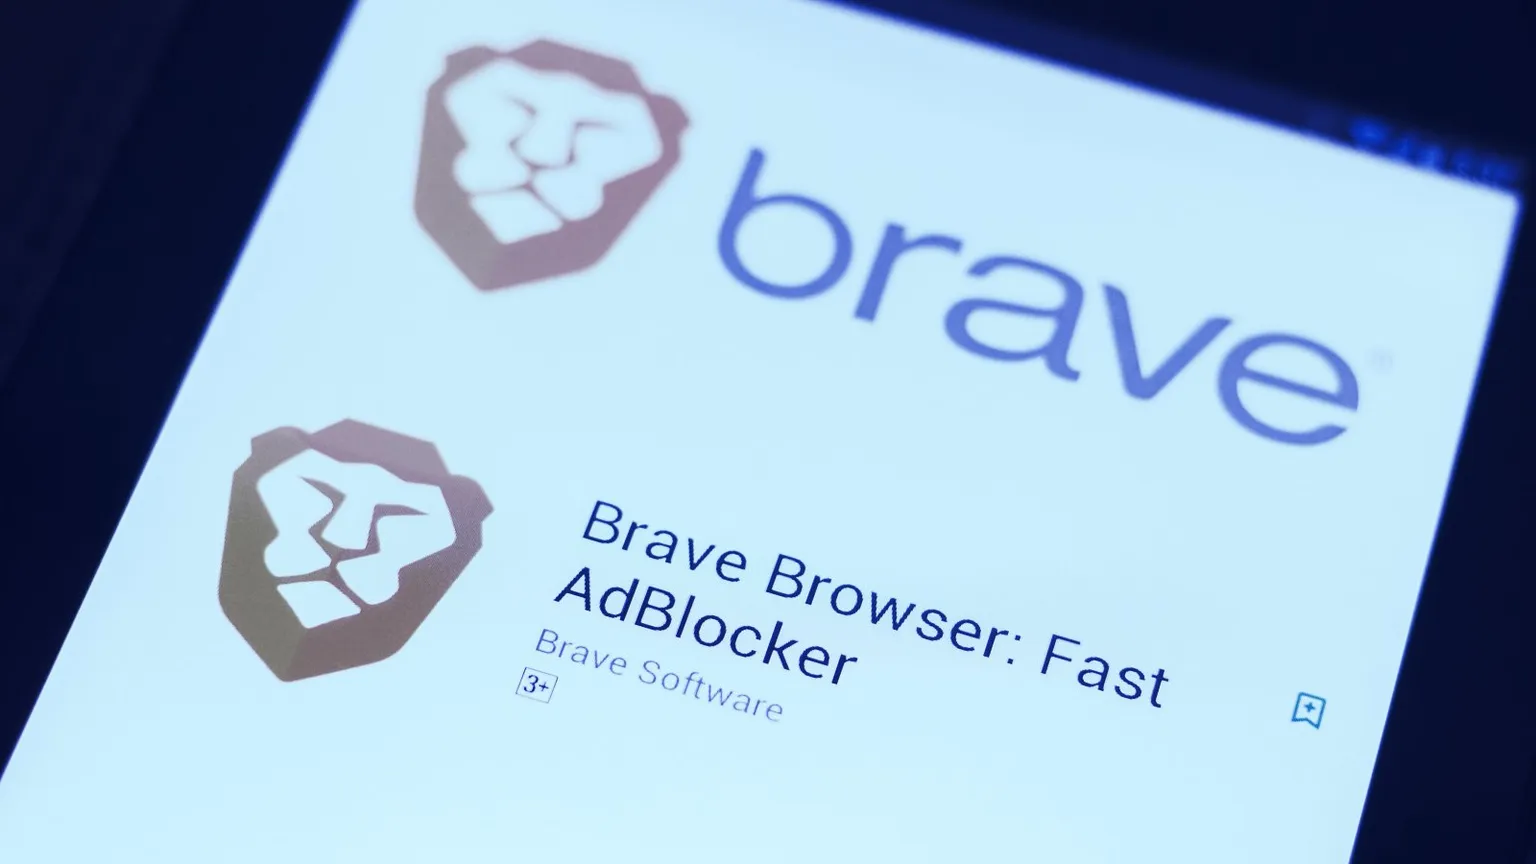 Brave has been caught violating users' trust. Image: Shutterstock